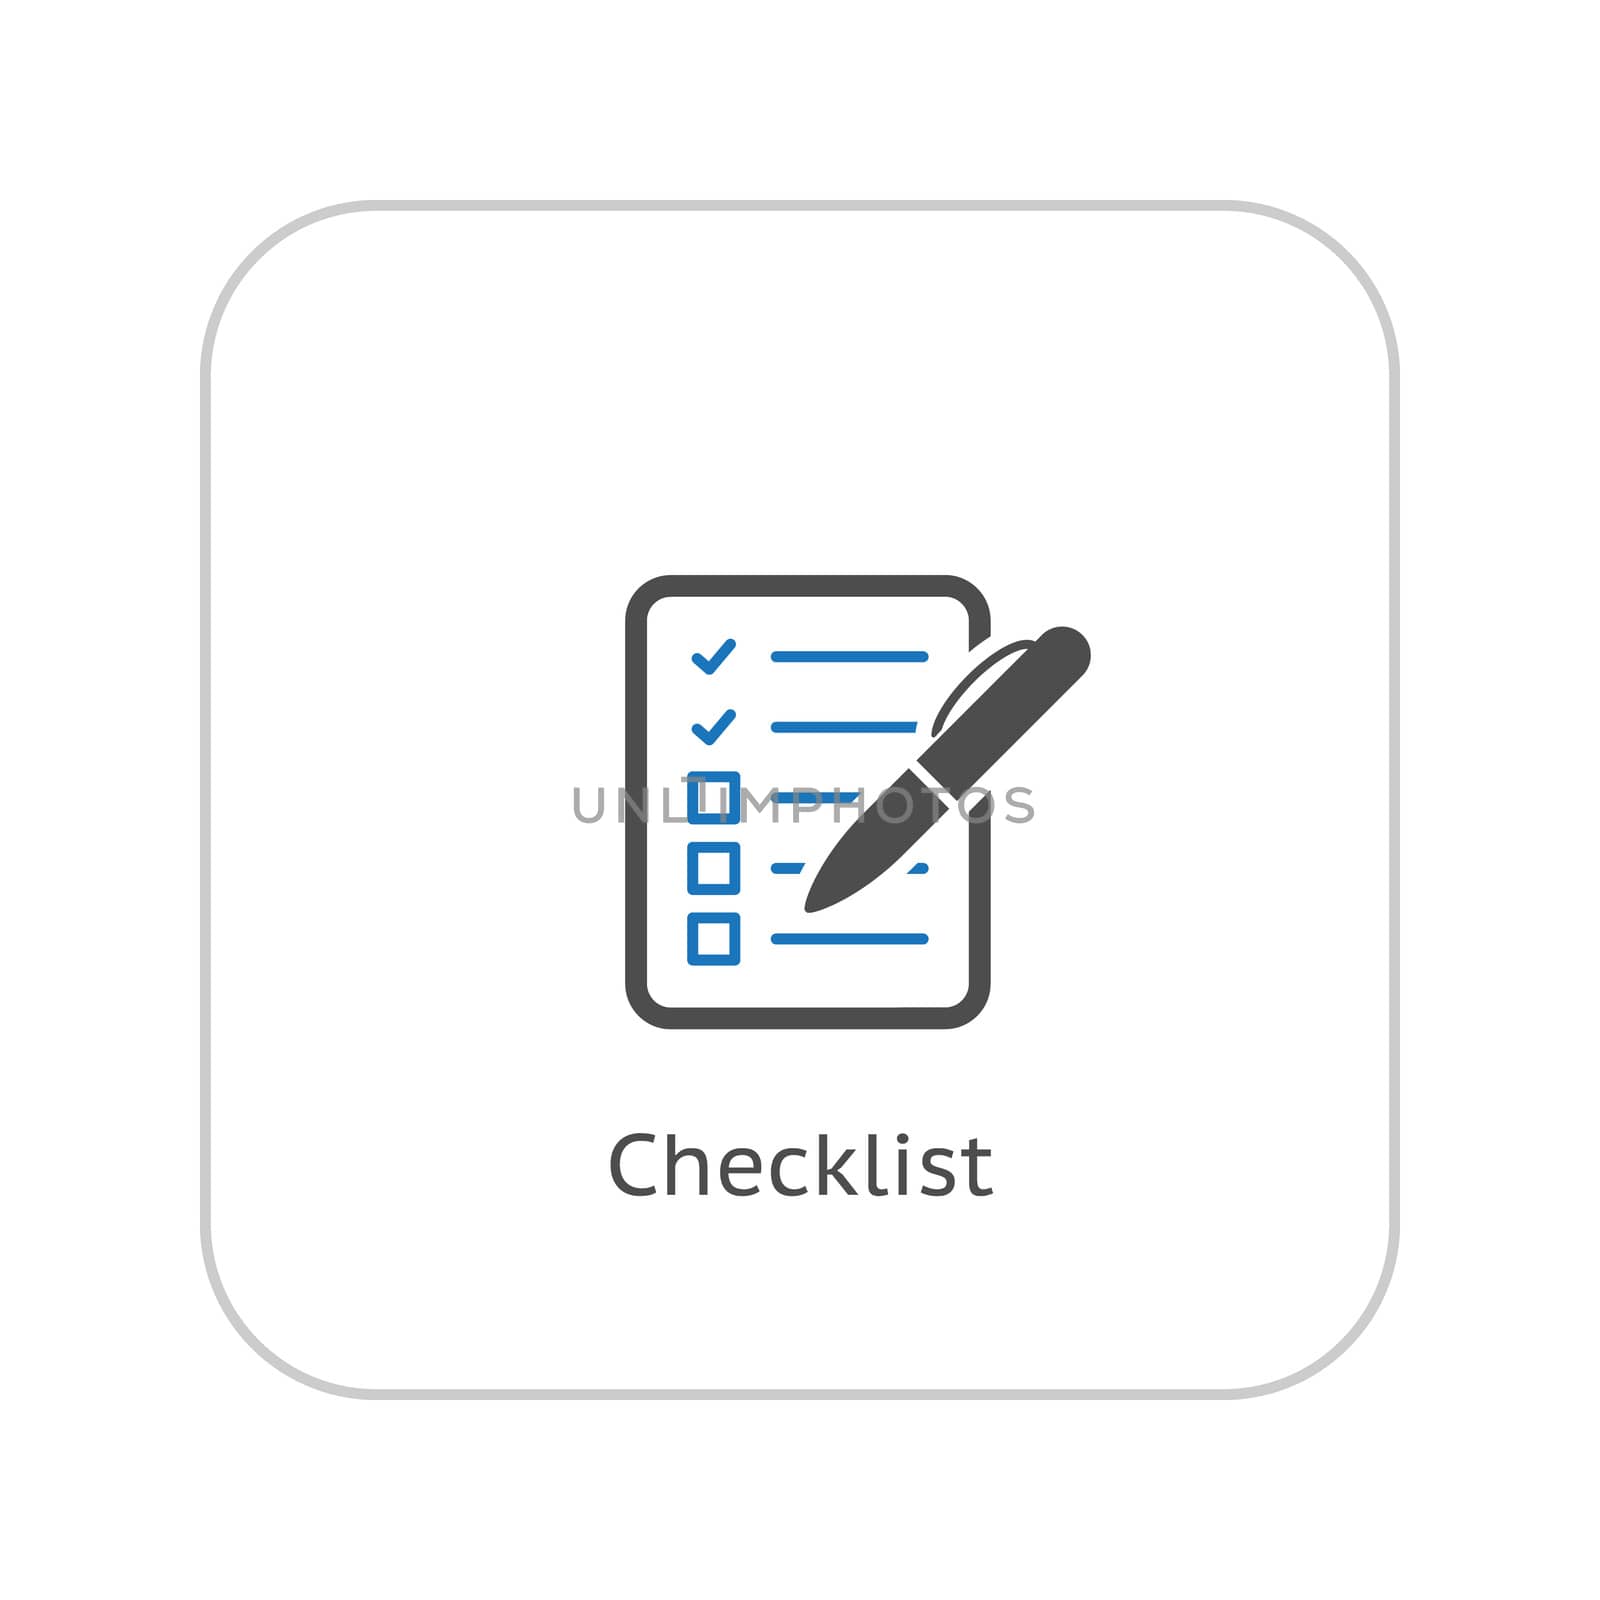 Check List Icon. Business Concept. Flat Design. by WaD